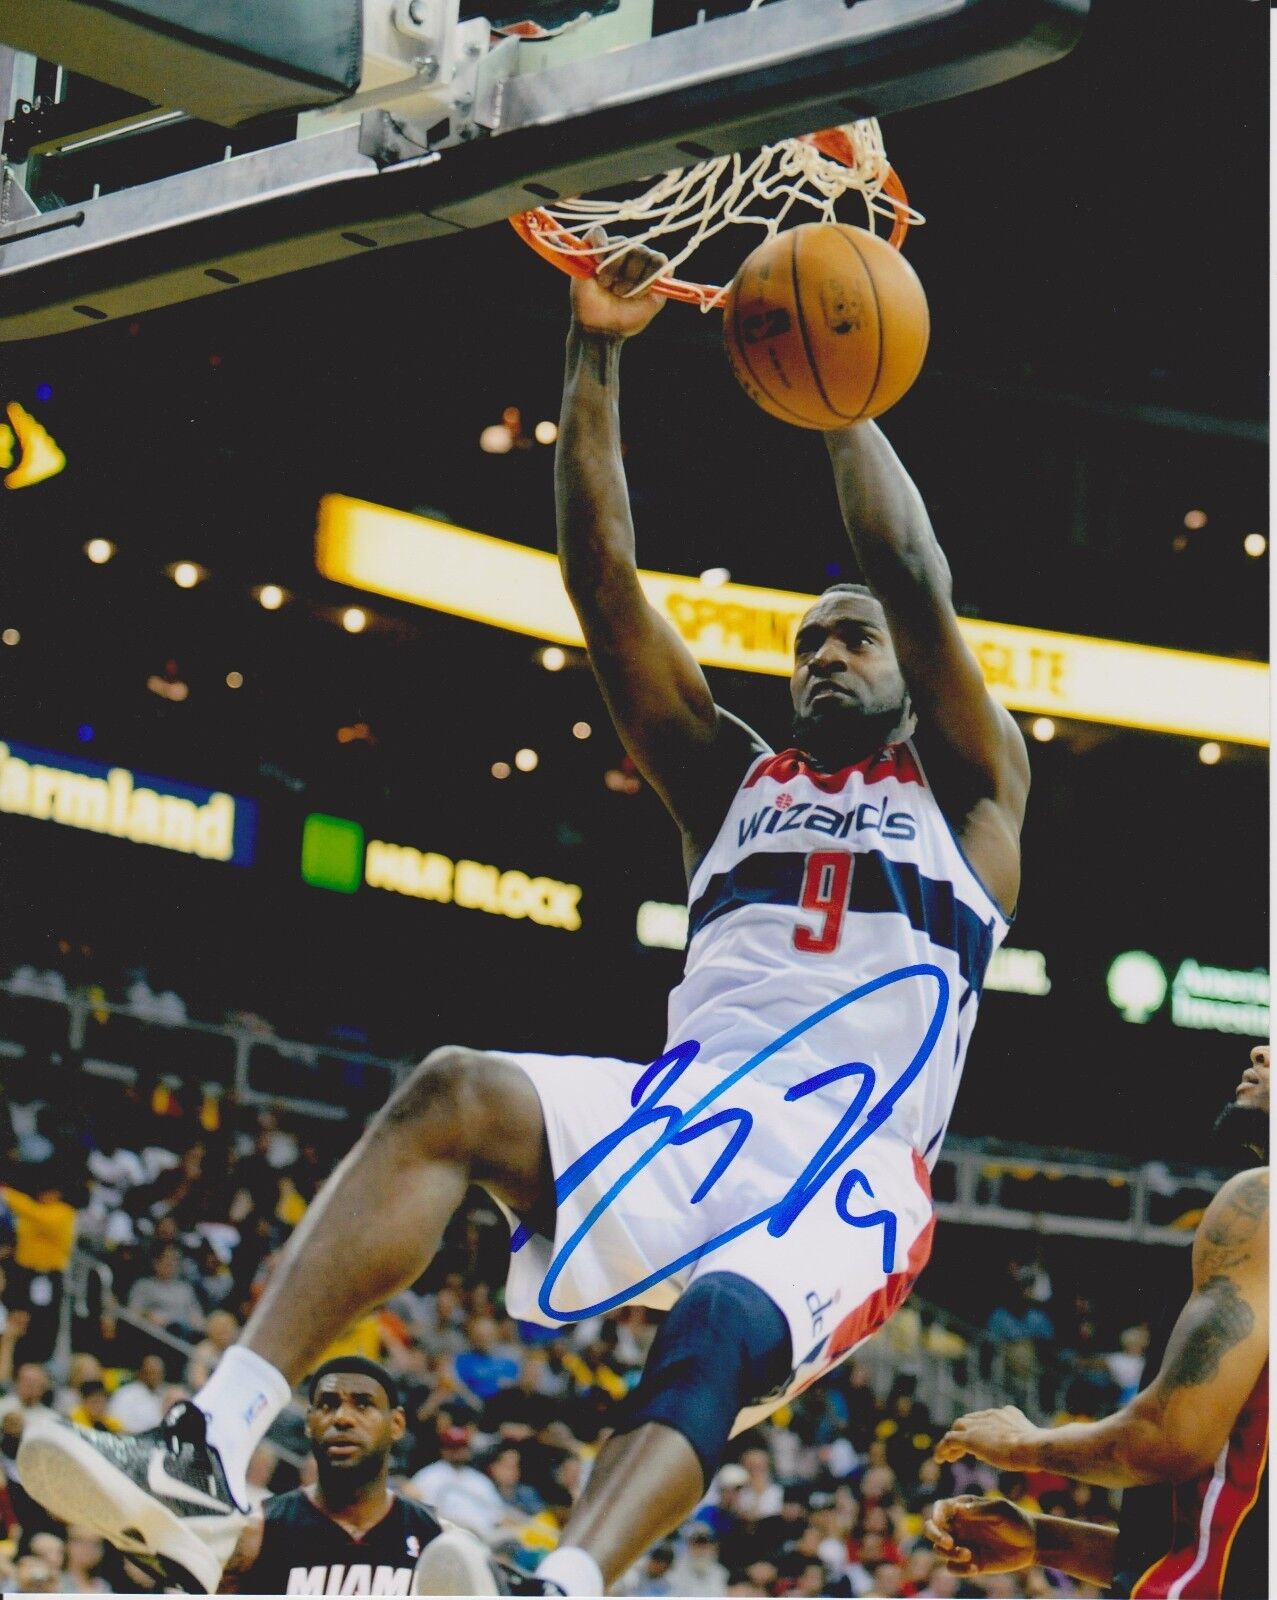 MARTELL WEBSTER signed WASHINGTON WIZARDS 8x10 Photo Poster painting